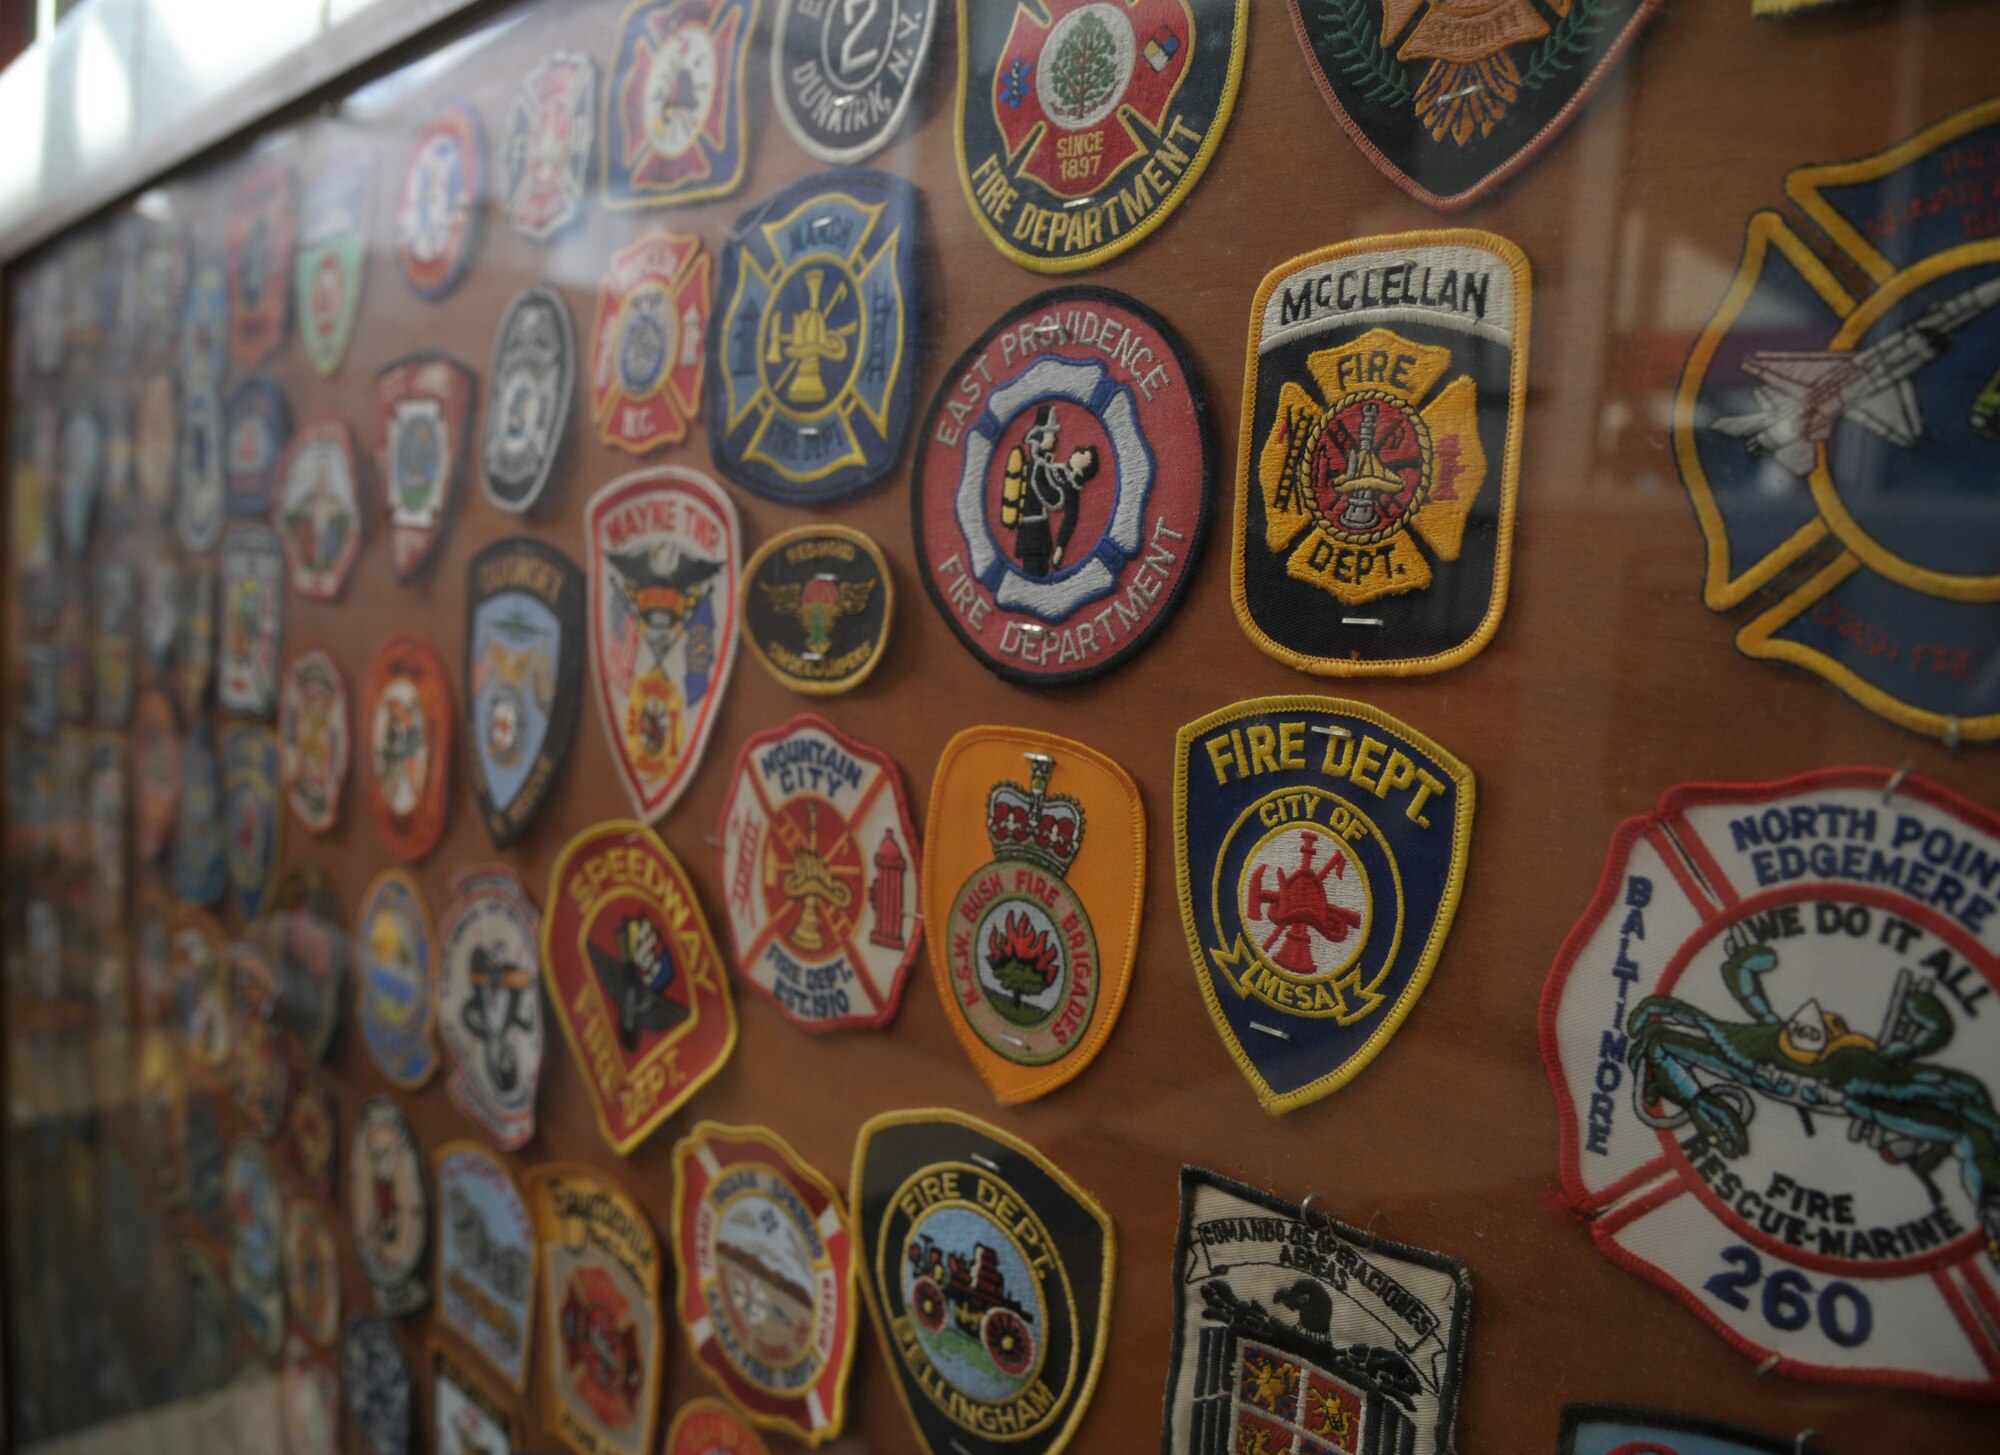 Patches displayed from various fire departments.